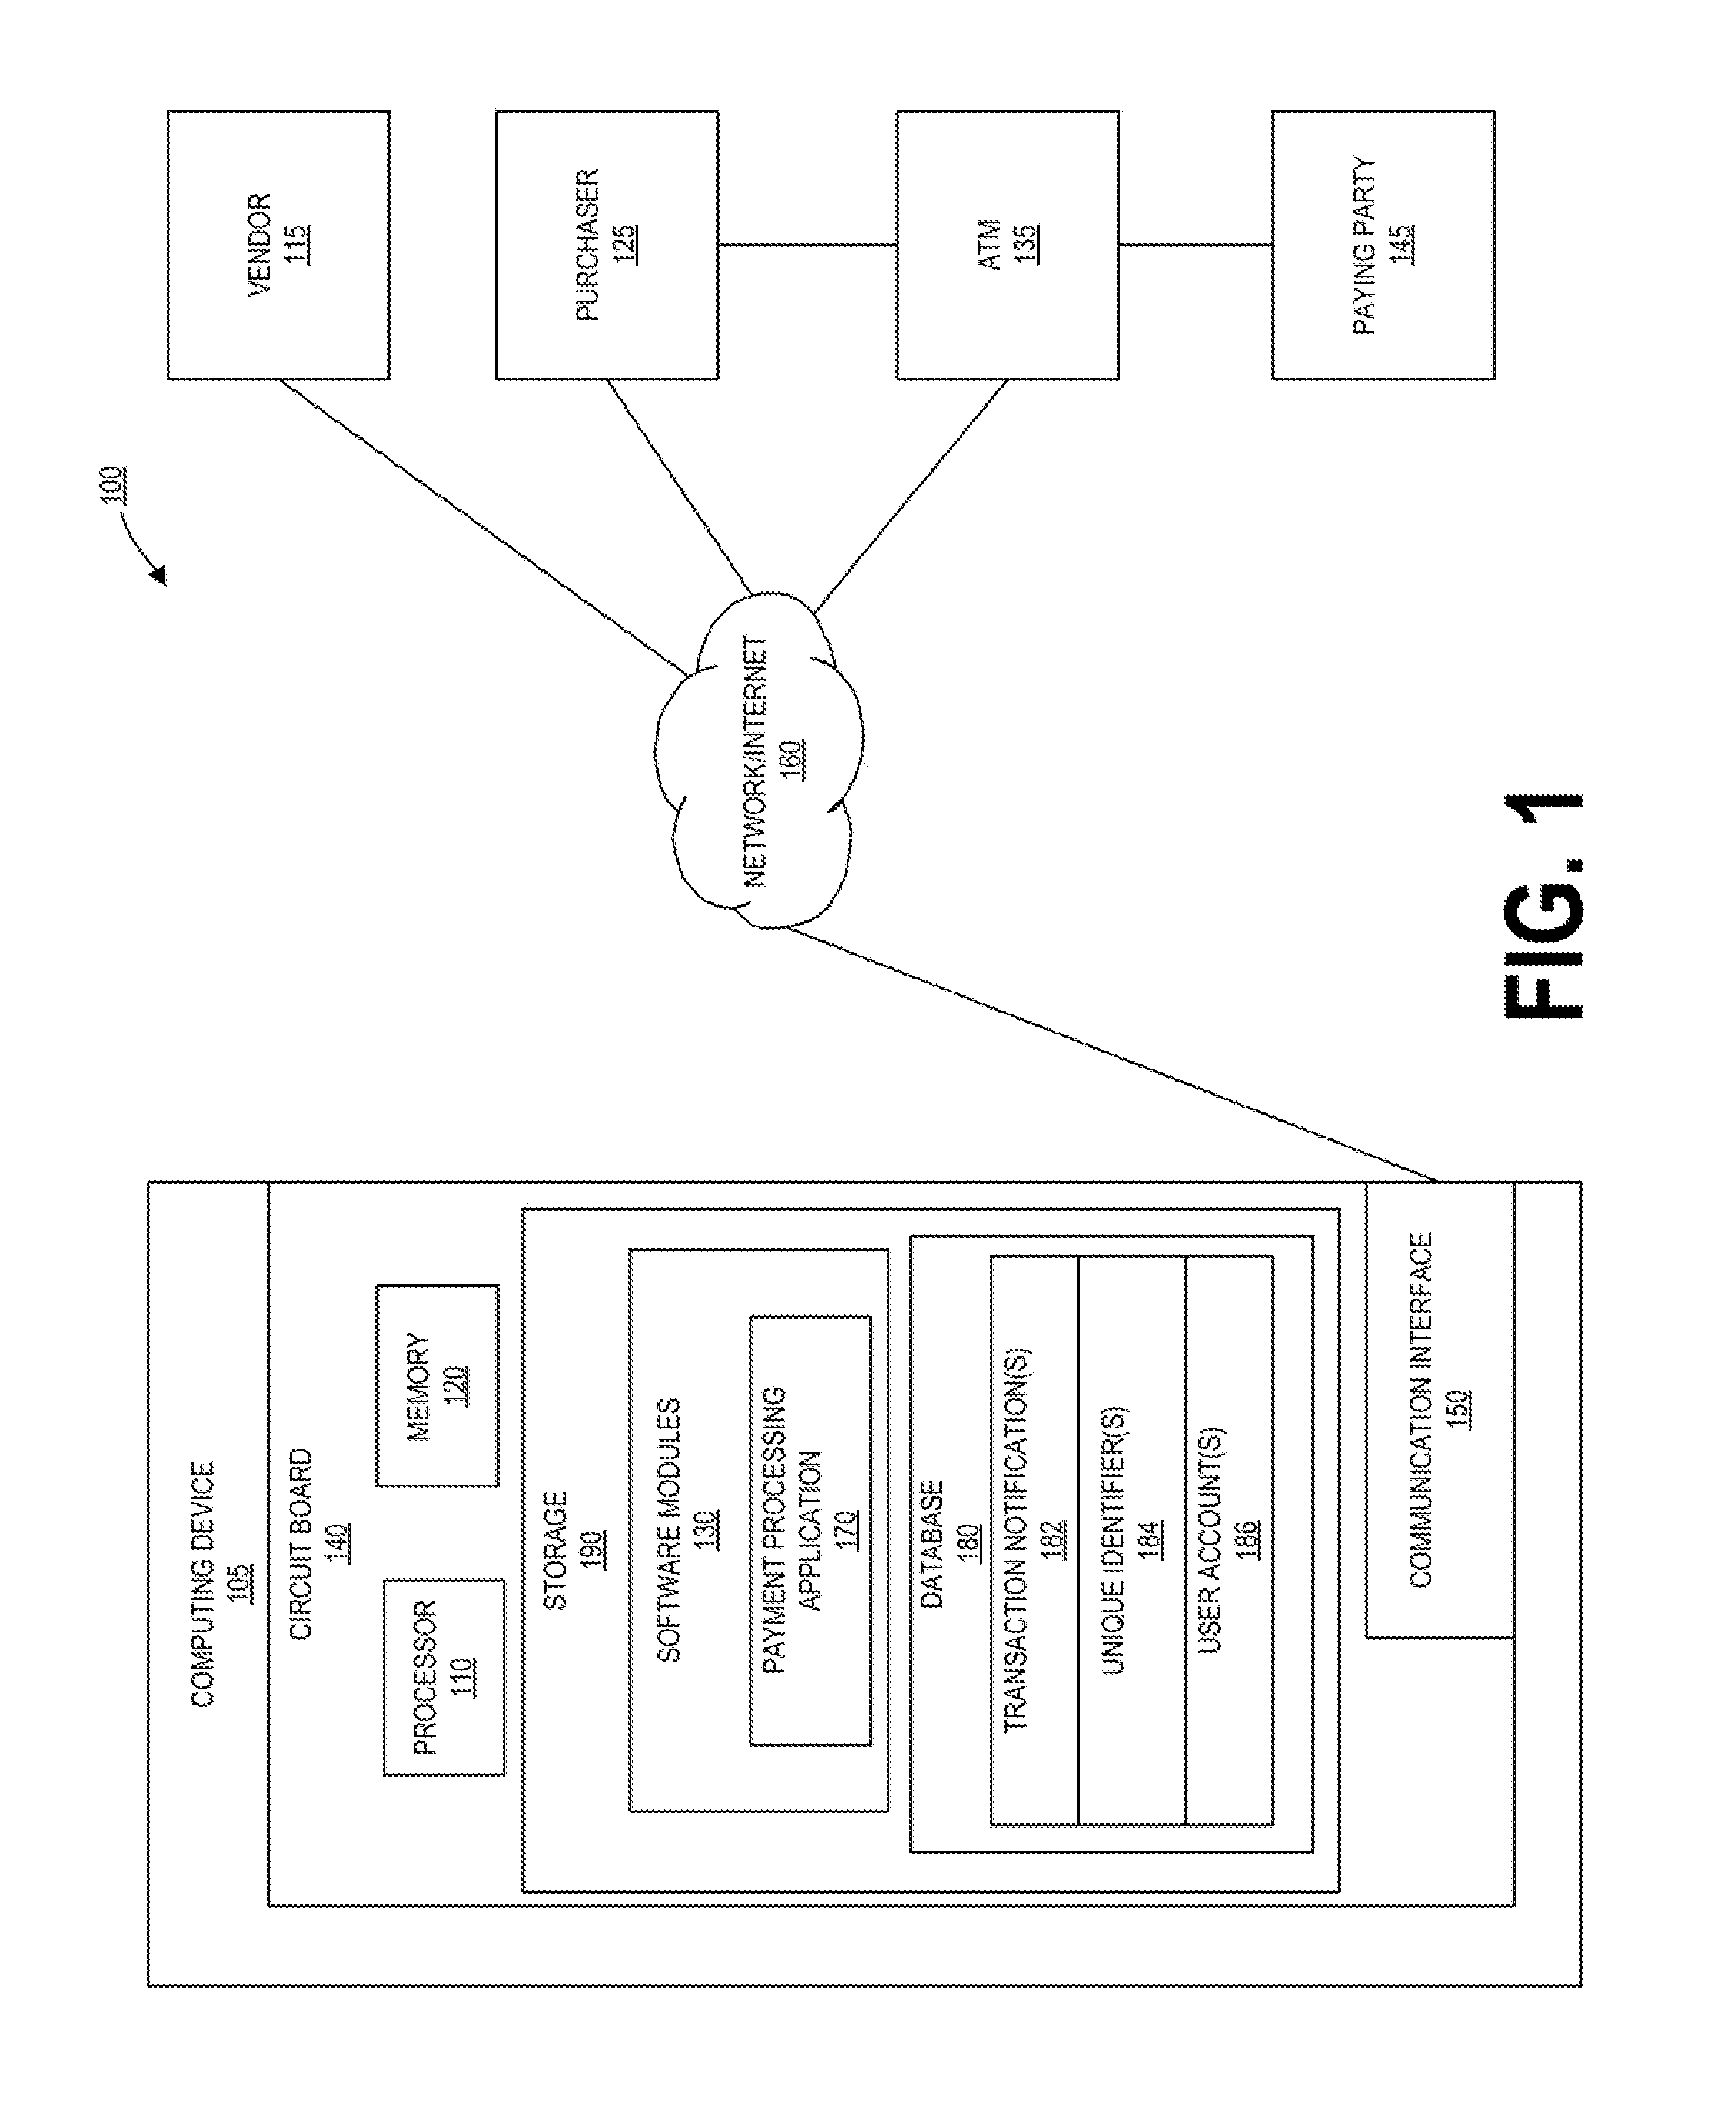 System and method for facilitating cash-based ecommerce transactions